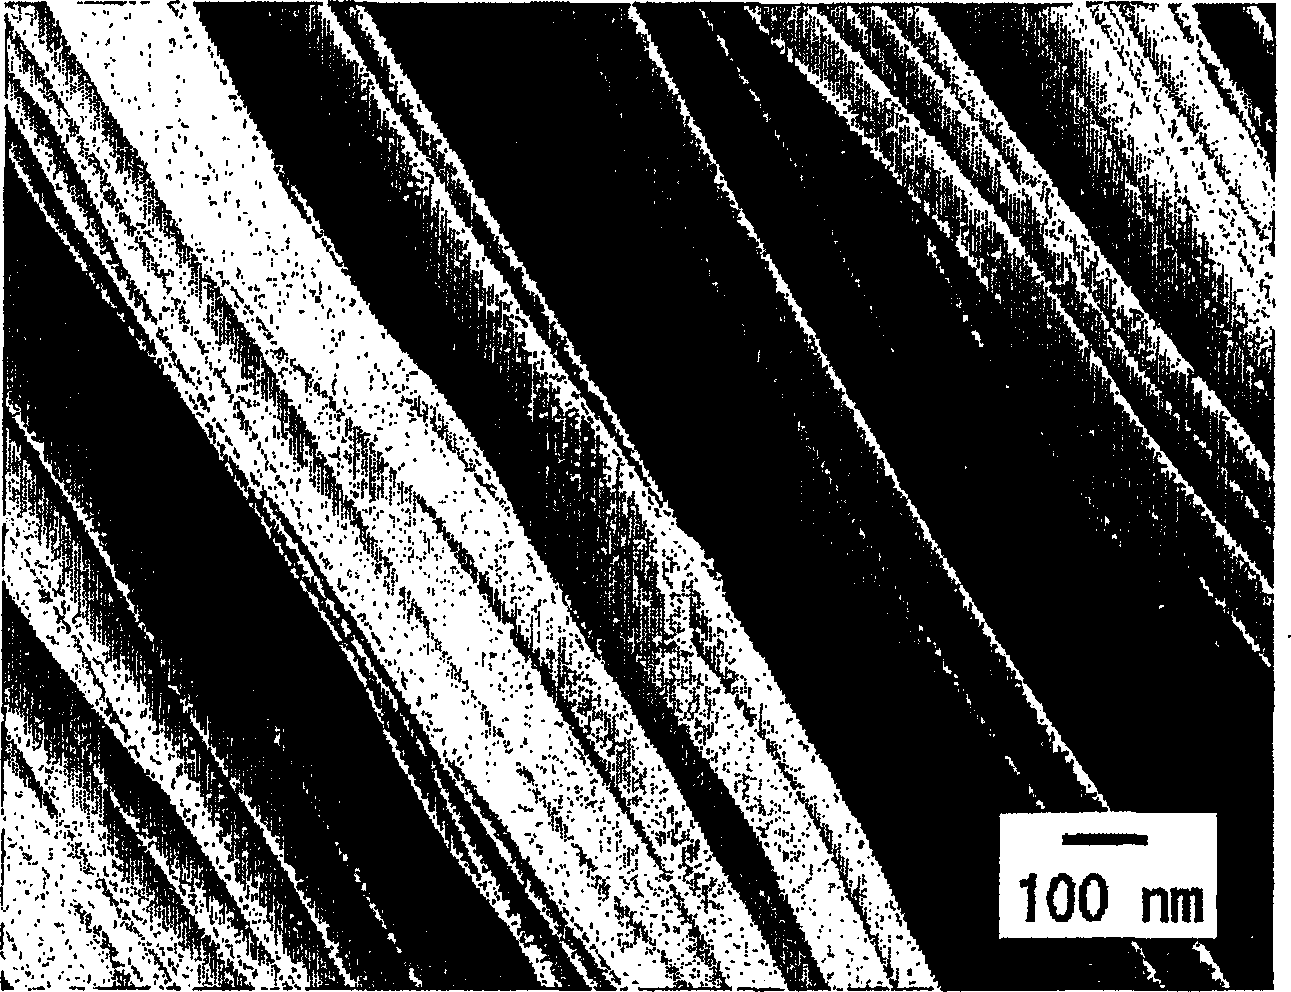 Nanofiber aggregate, polymer alloy fiber, hybrid fiber, fibrous structures, and processes for production of them